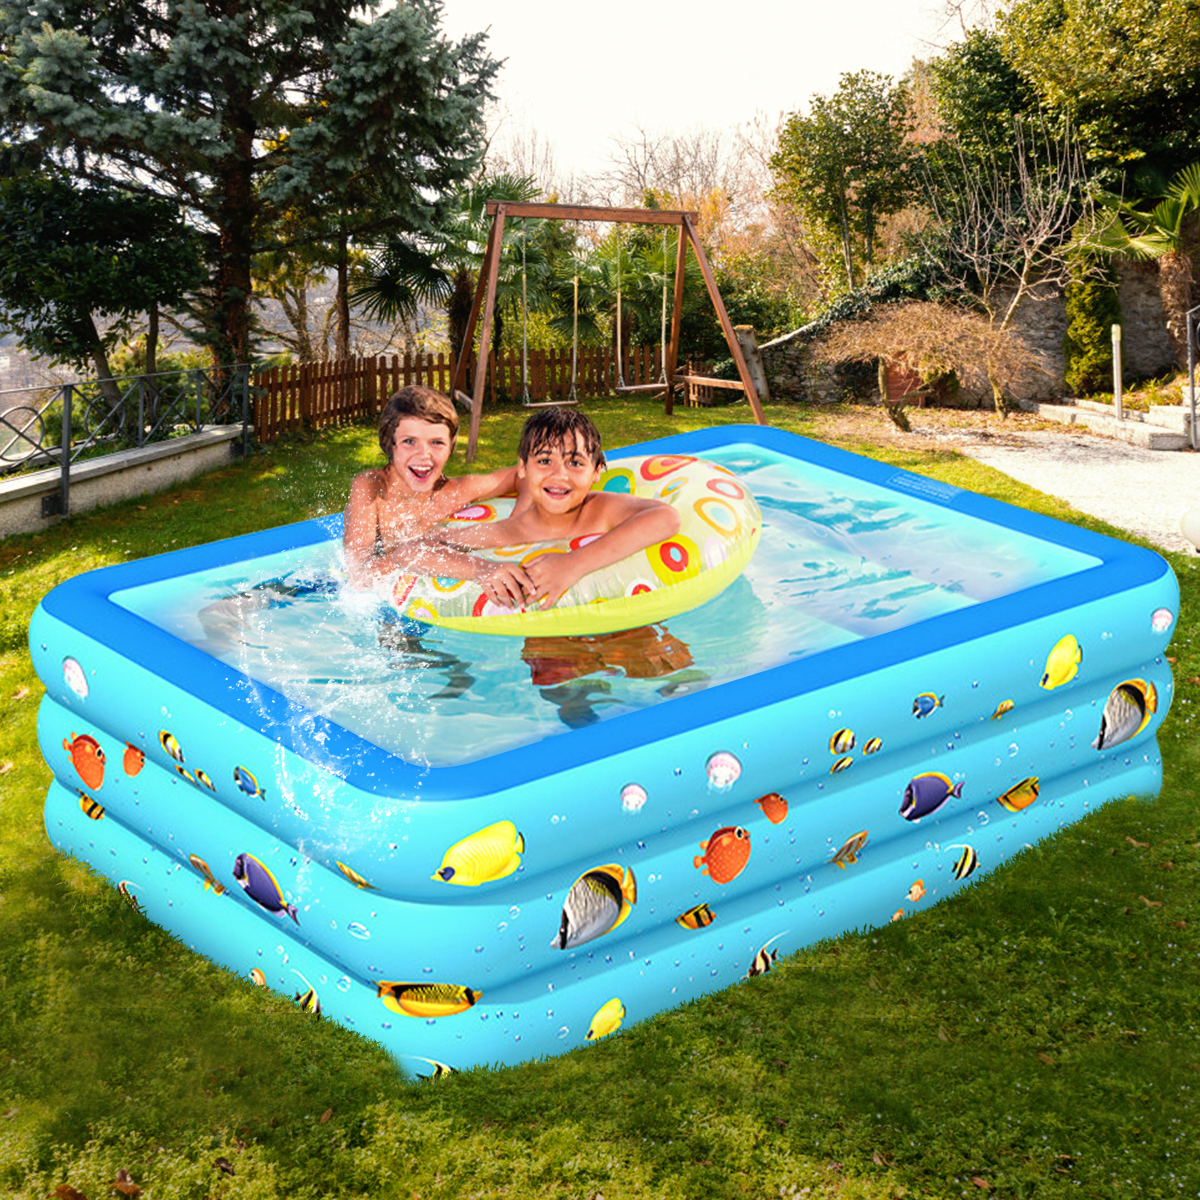 Inflatable-Swimming-Pool-Yard-Garden-Family-Kids-Play-Backyard-Blow-Up-Paddling-Pool-Bathing-Tub-Out-1689353-9